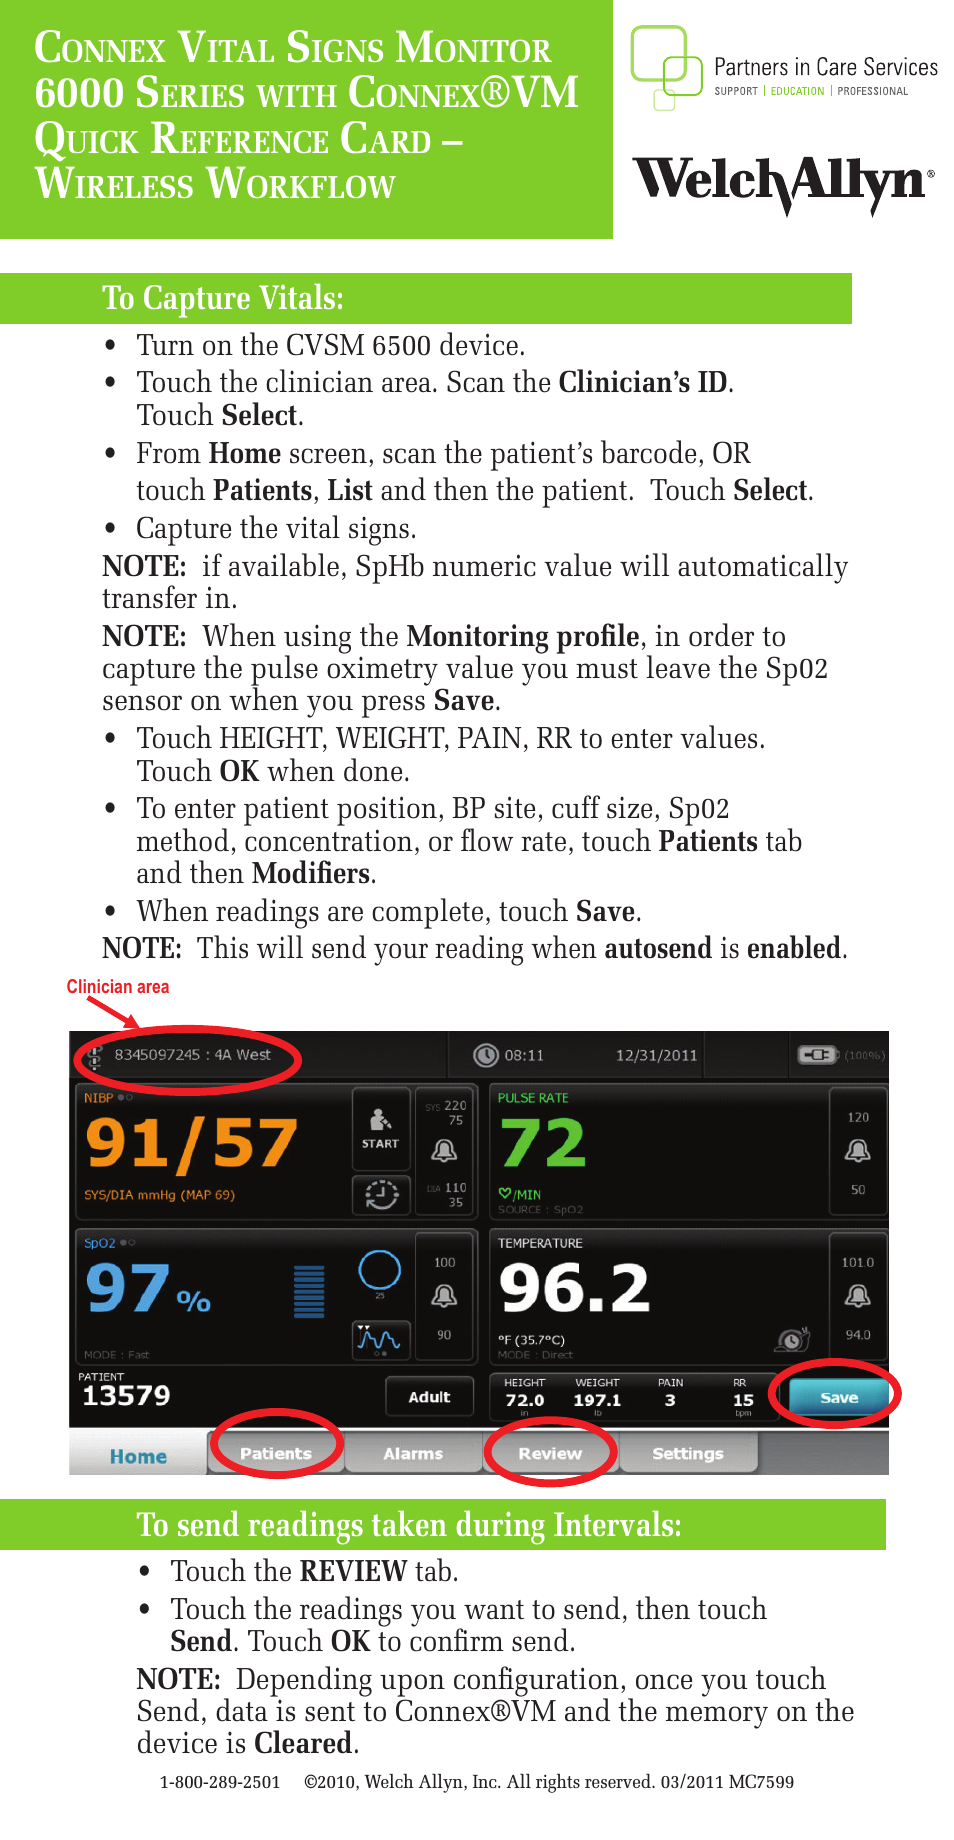 Connex Vital Signs Monitor 6000 Series with ConnexVM Wireless Workflow - Quick Reference Guide